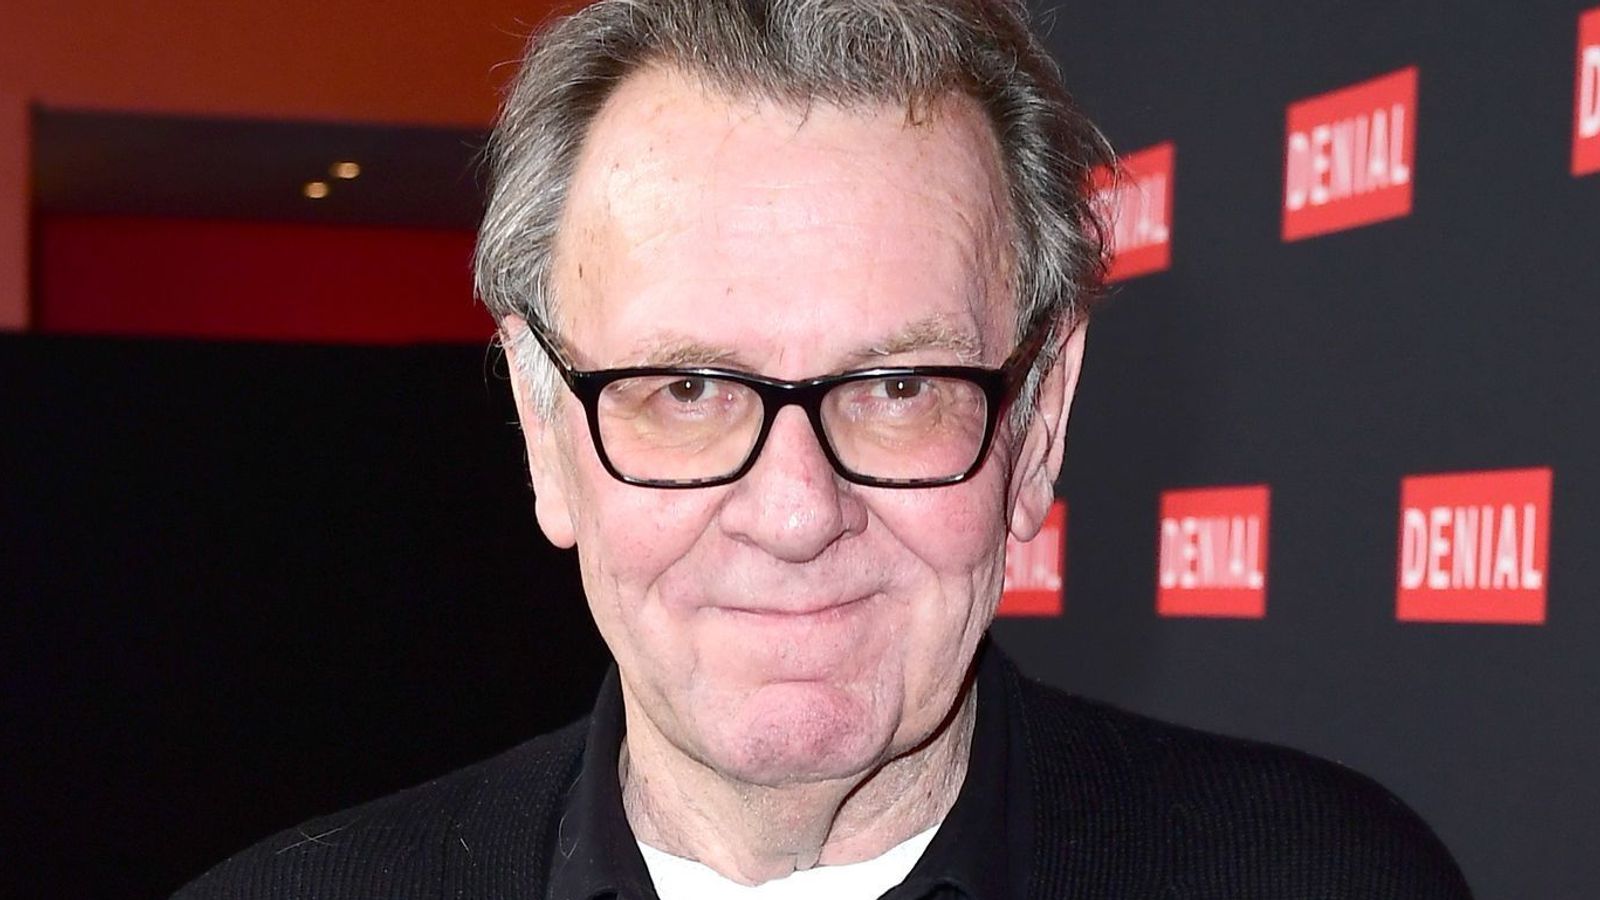 Actor Tom Wilkinson - known for roles in The Full Monty and Batman Begins - dies aged 75